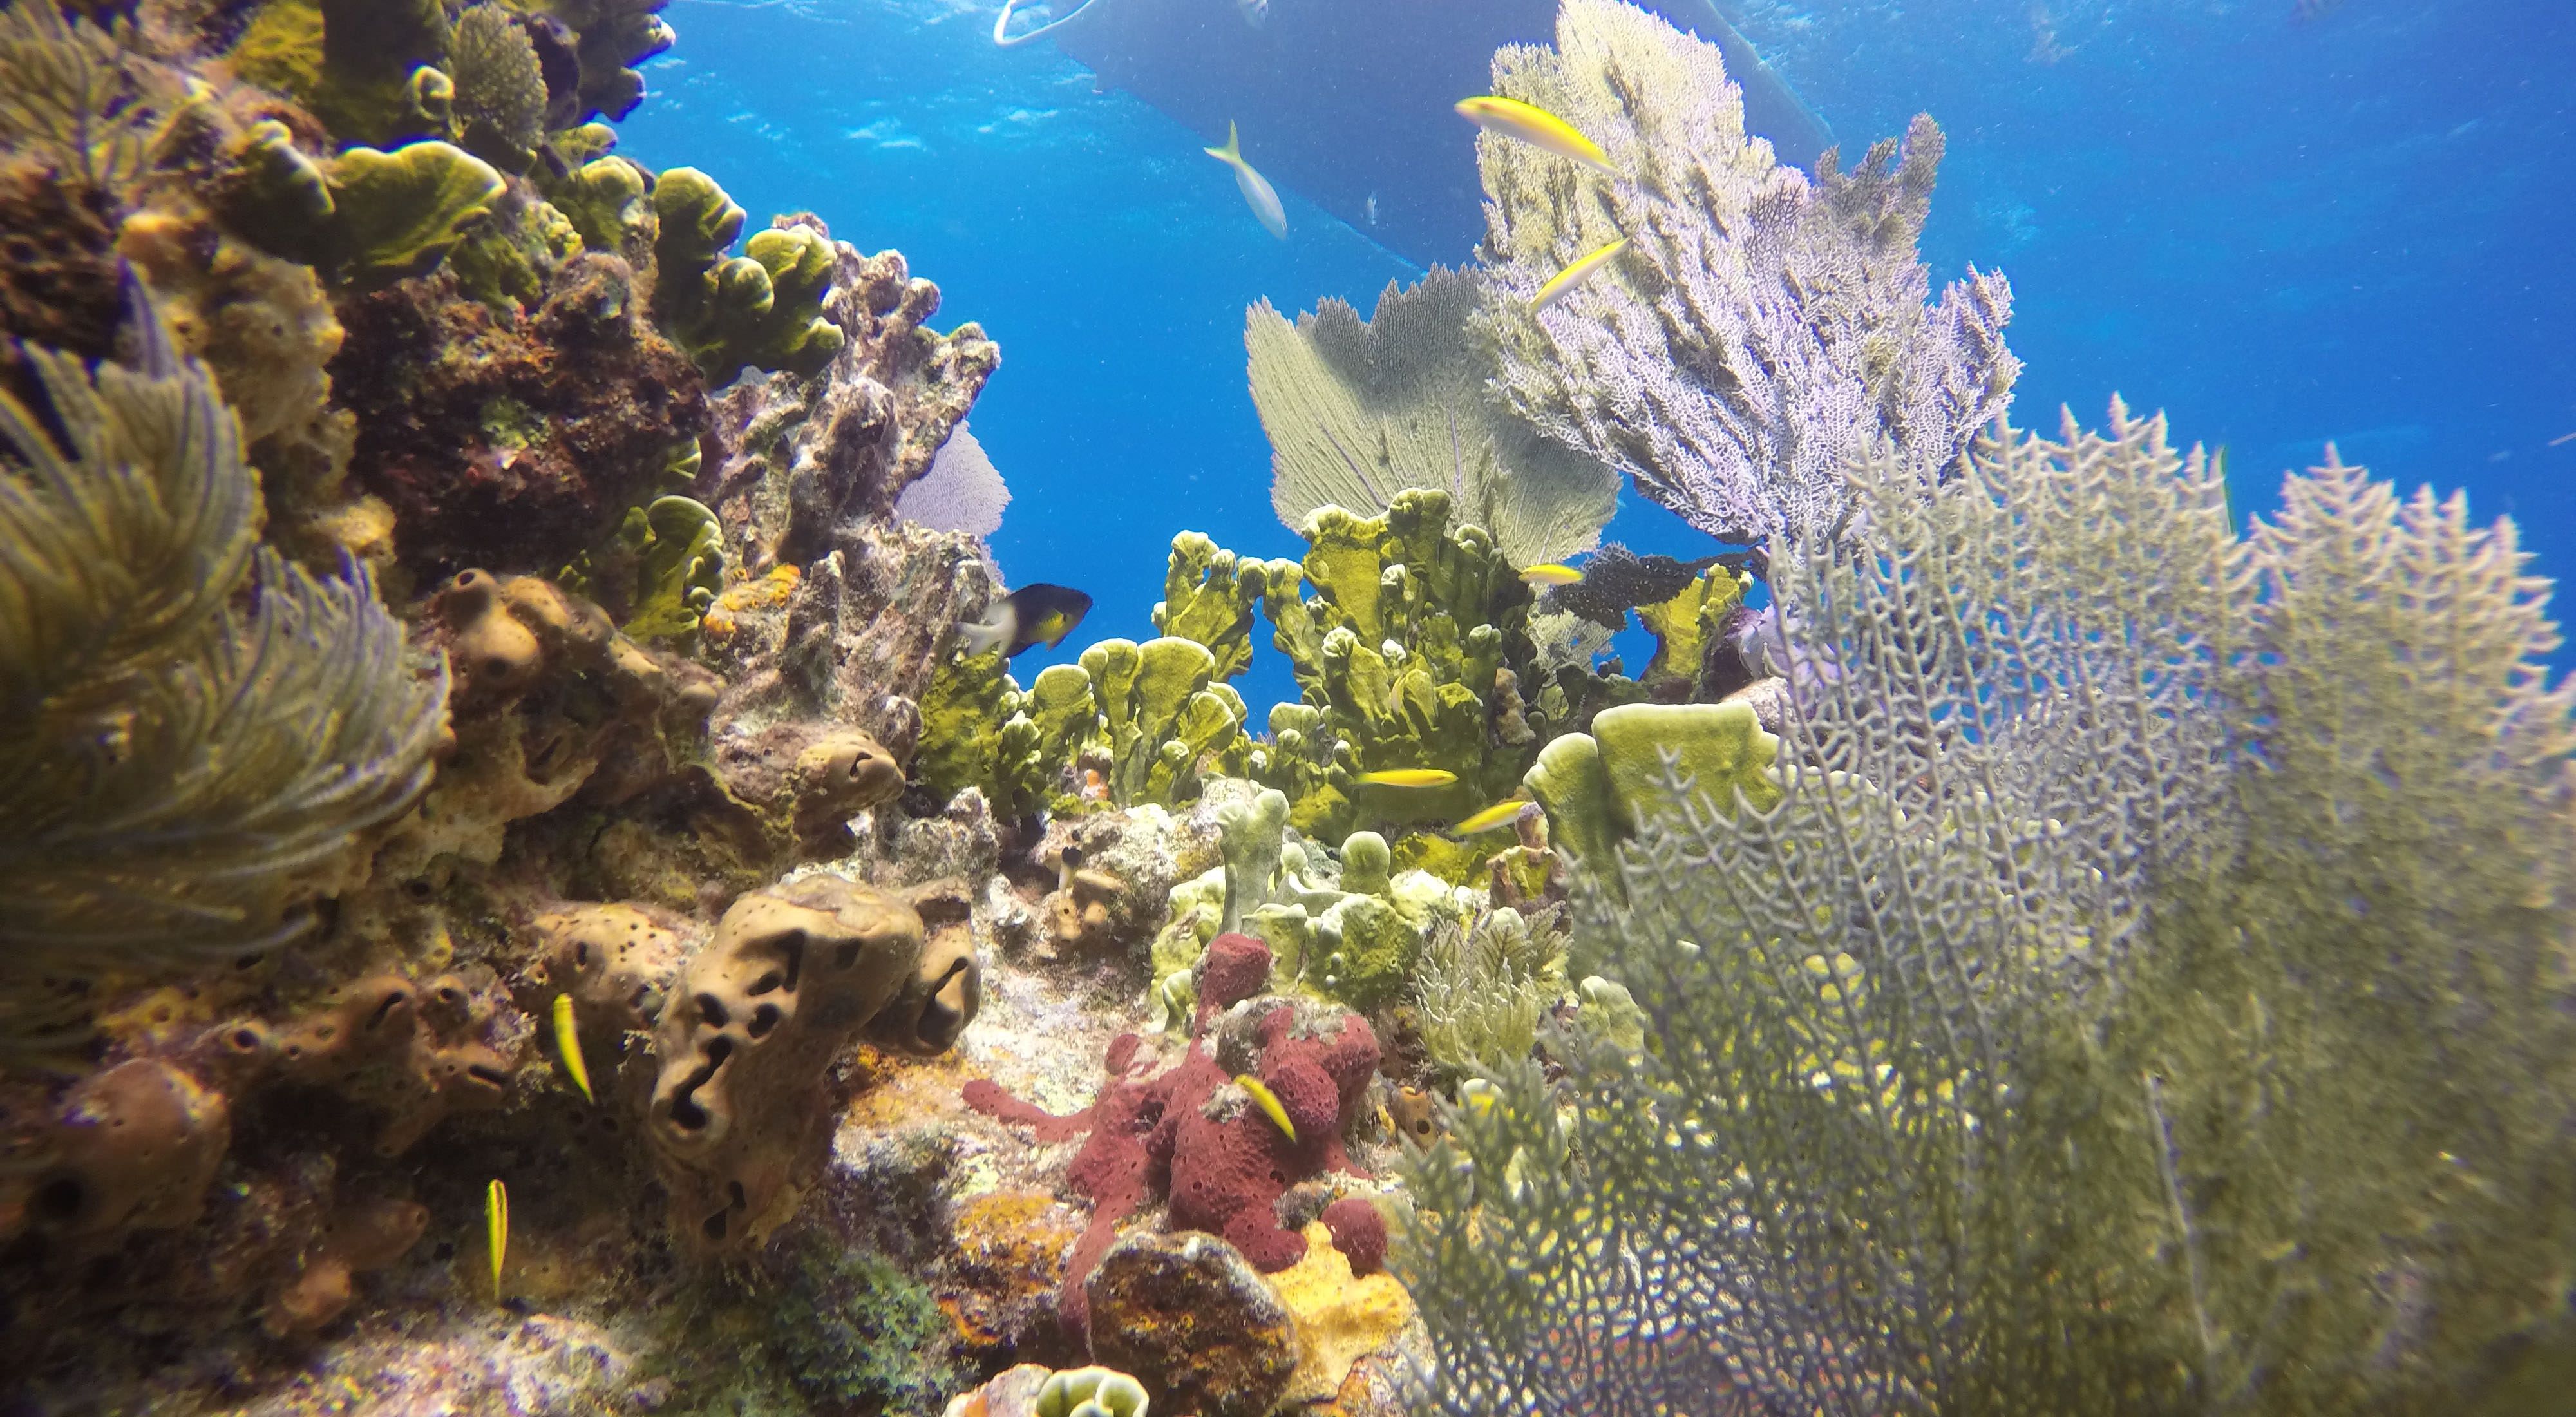 Nature Conservancy buys insurance for vulnerable coral reefs in